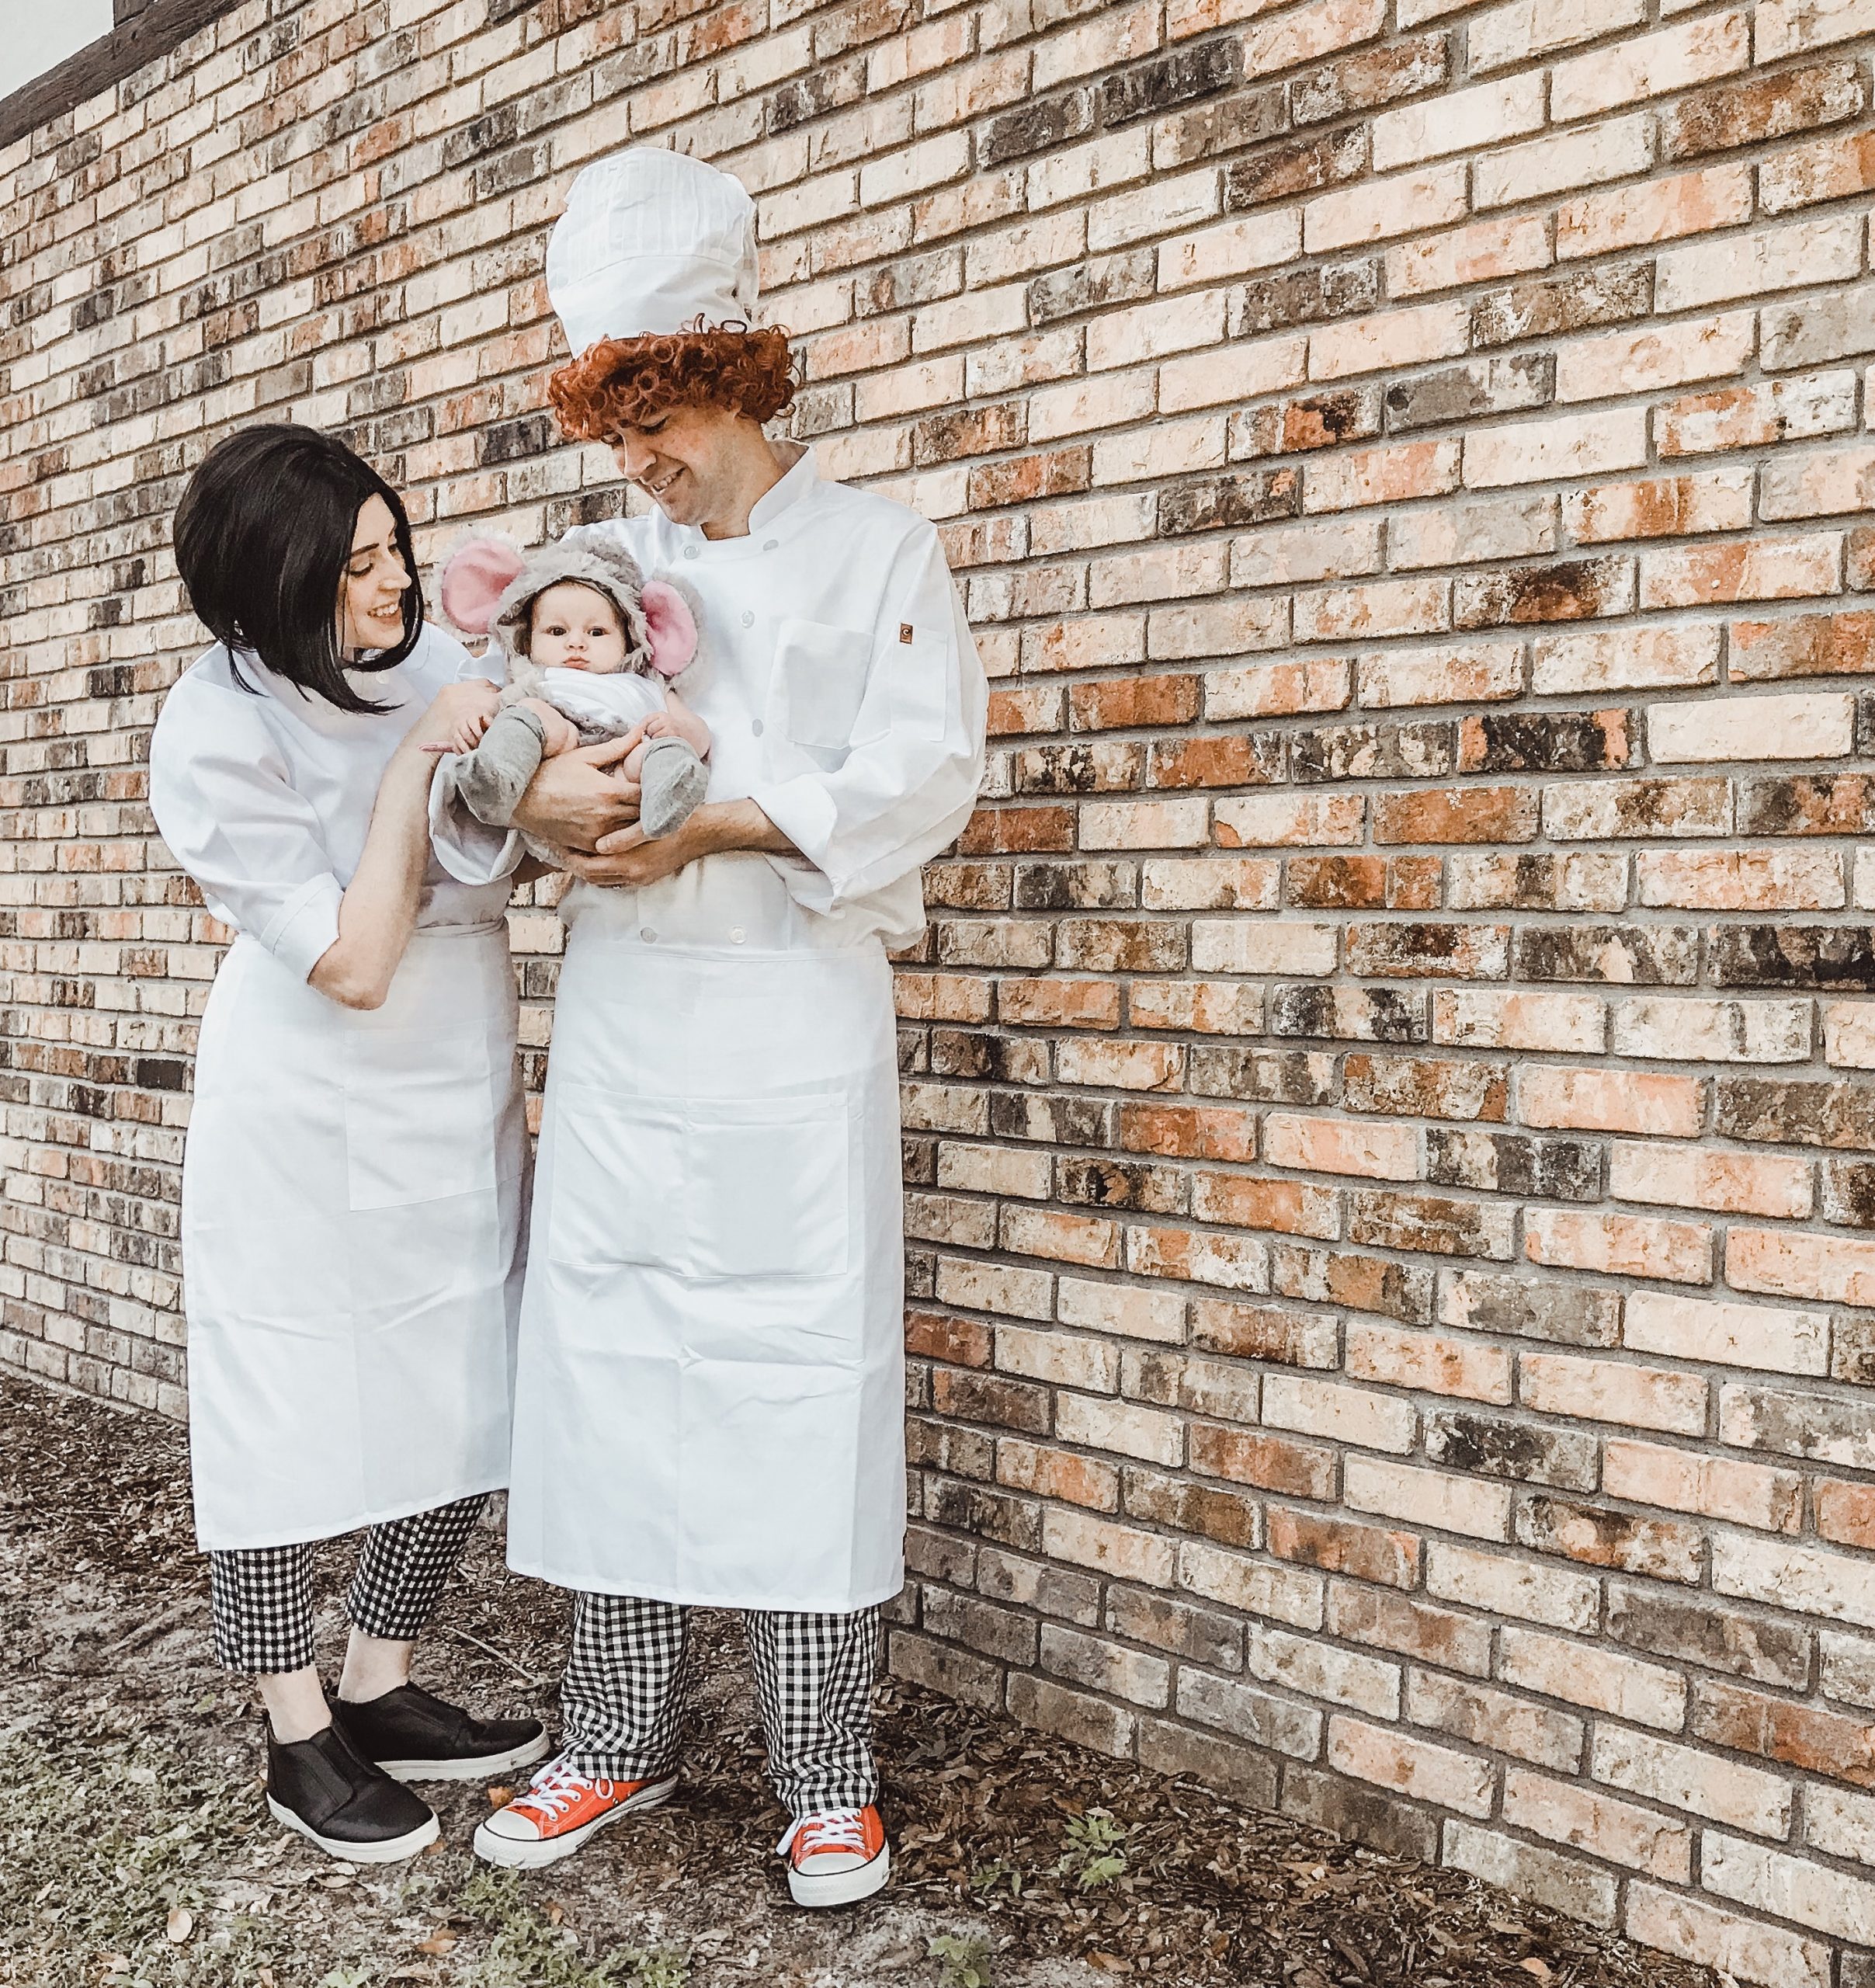 mom and dad dressed as chefs with little girl dressed as a mouse